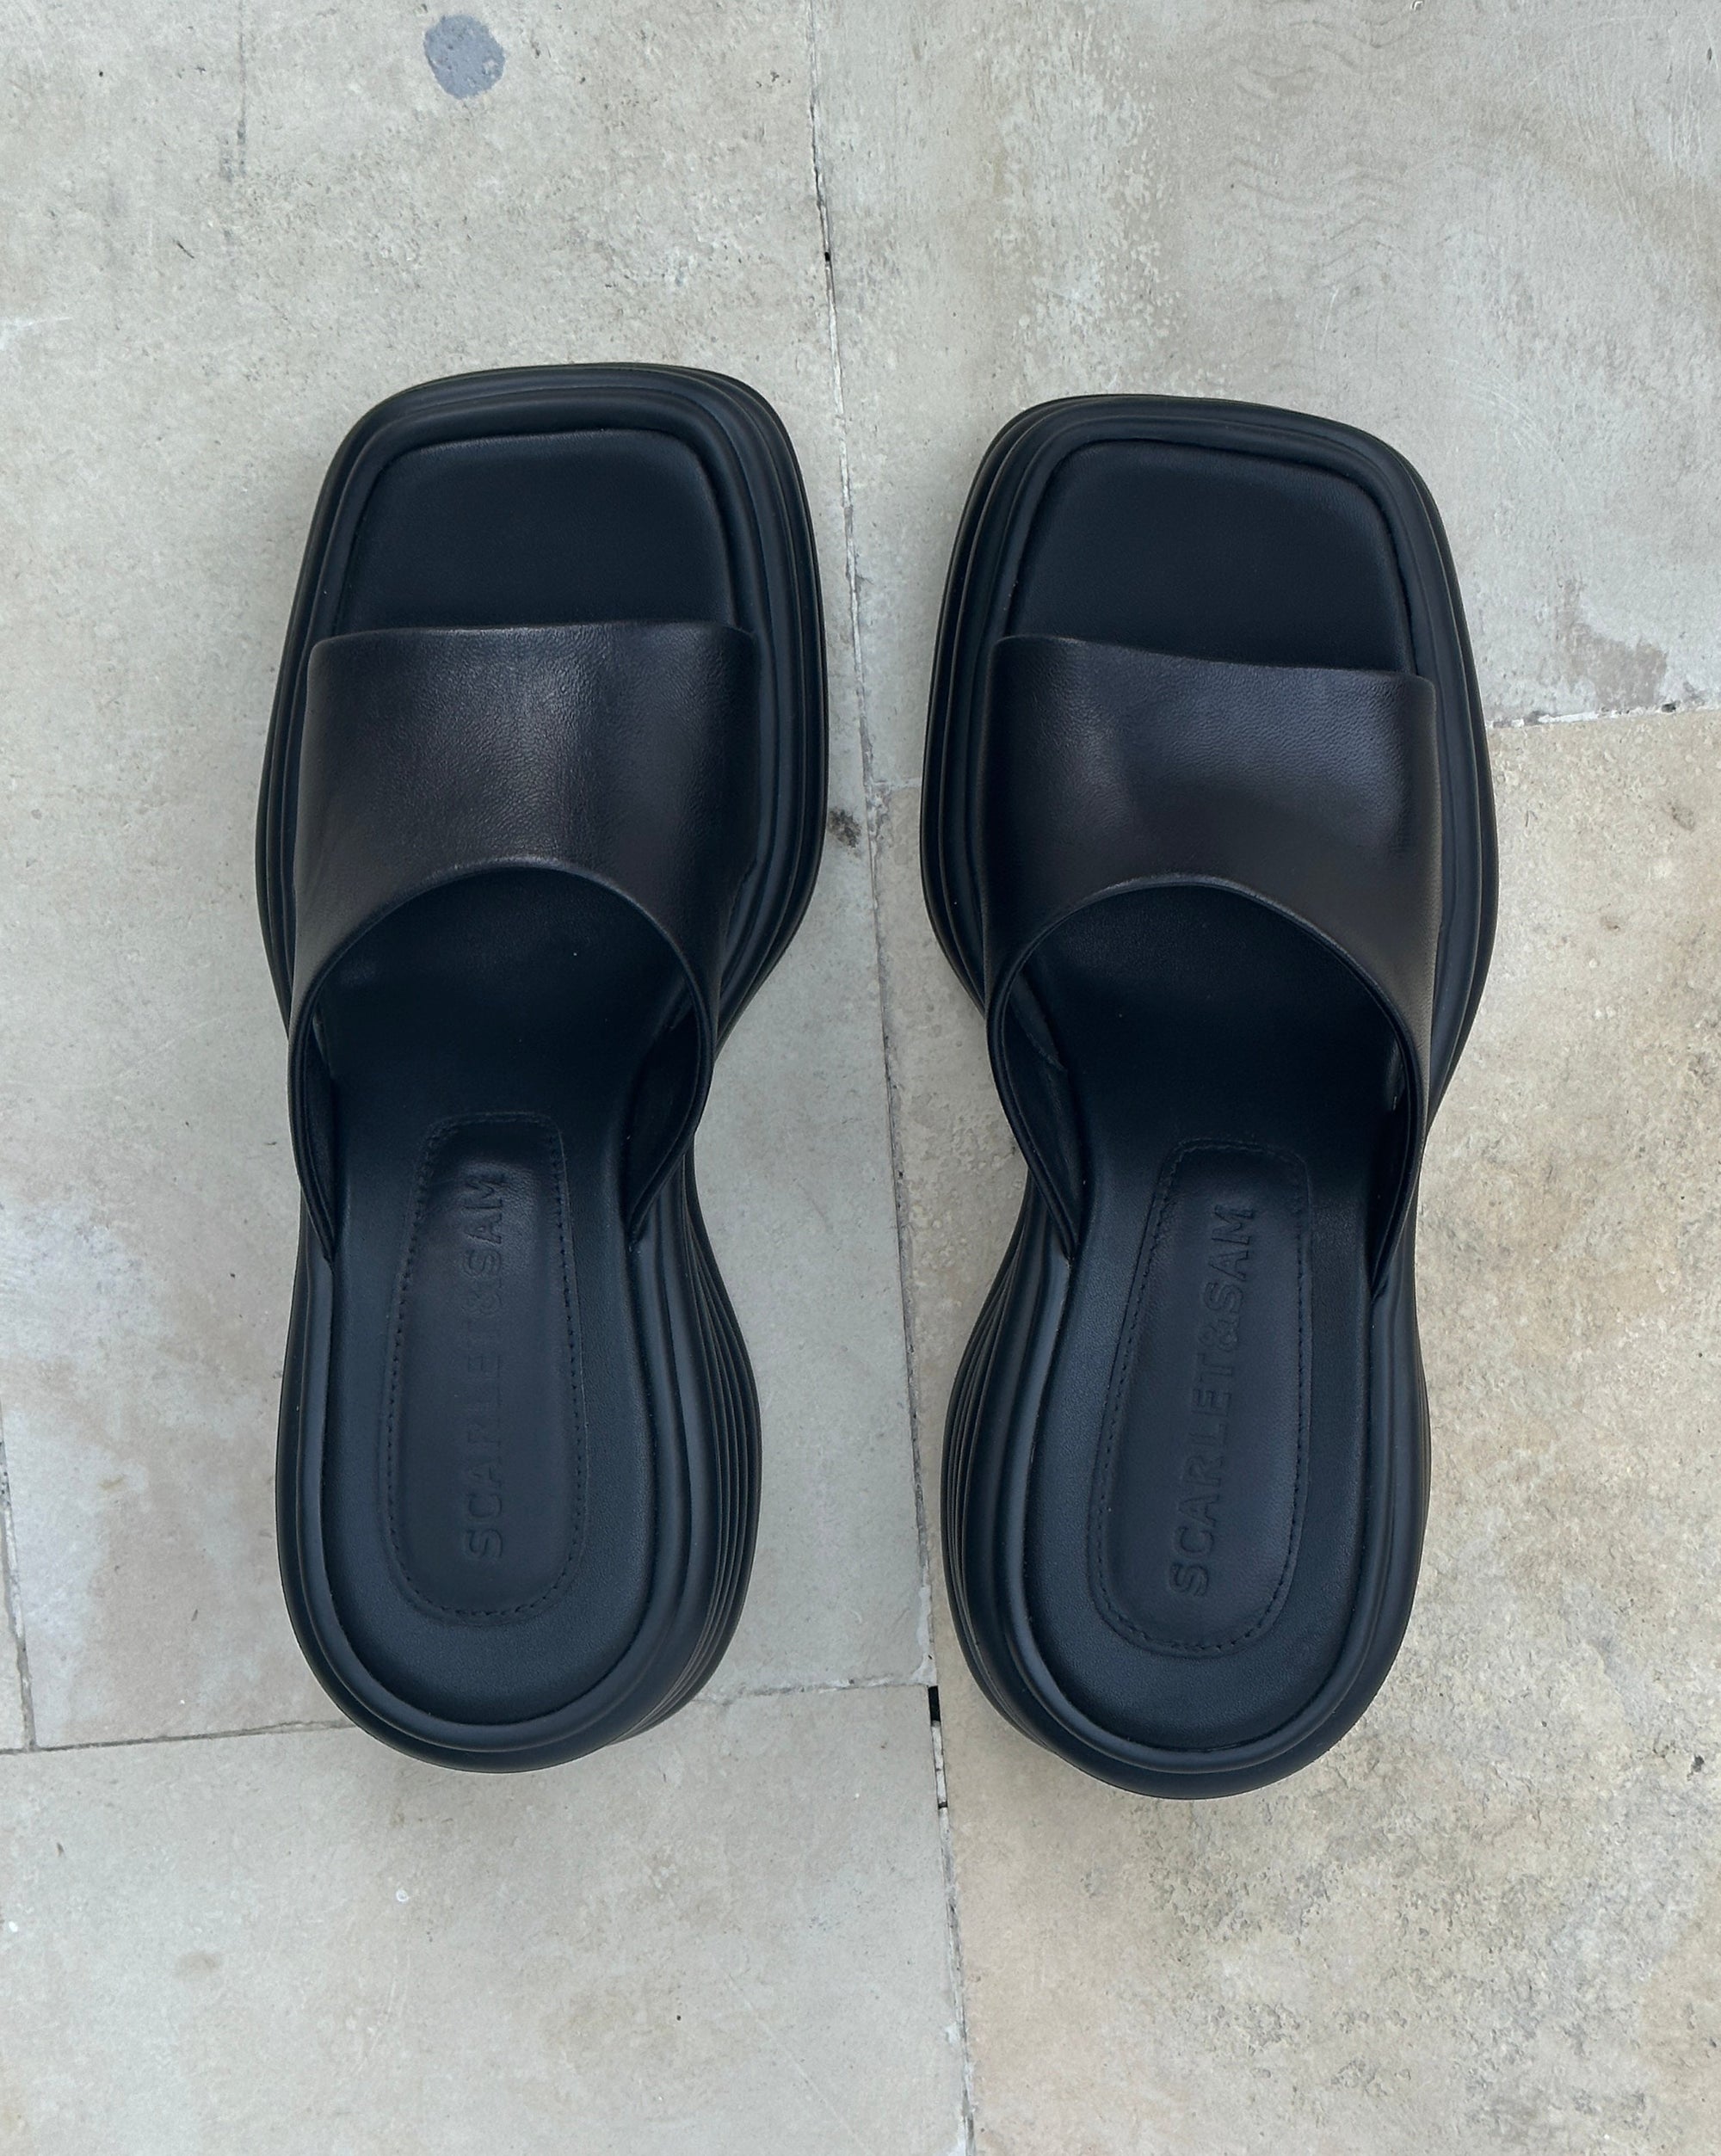 Scarlet & Sam's famous JUICY WEDGES. These shoes are a combination of Rubber & Leather to provide maximum comfort & style. The Juicy Wedge is the perfect summer staple: Black, Chunky, Platform, Square Toe, Soft footbed, flattering sandal. 